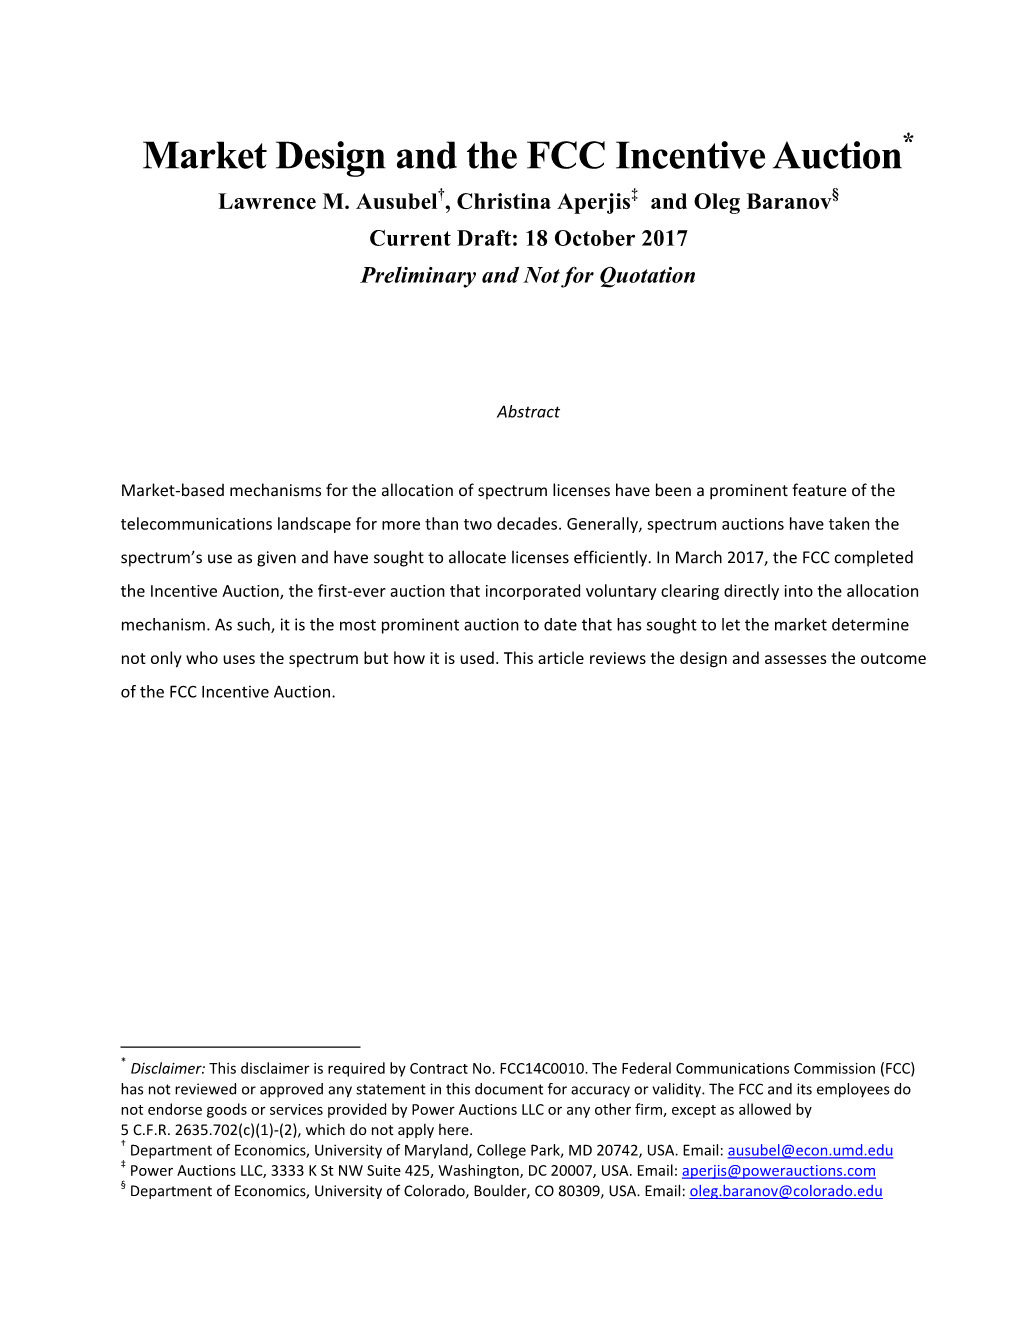 Market Design and the FCC Incentive Auction Lawrence M